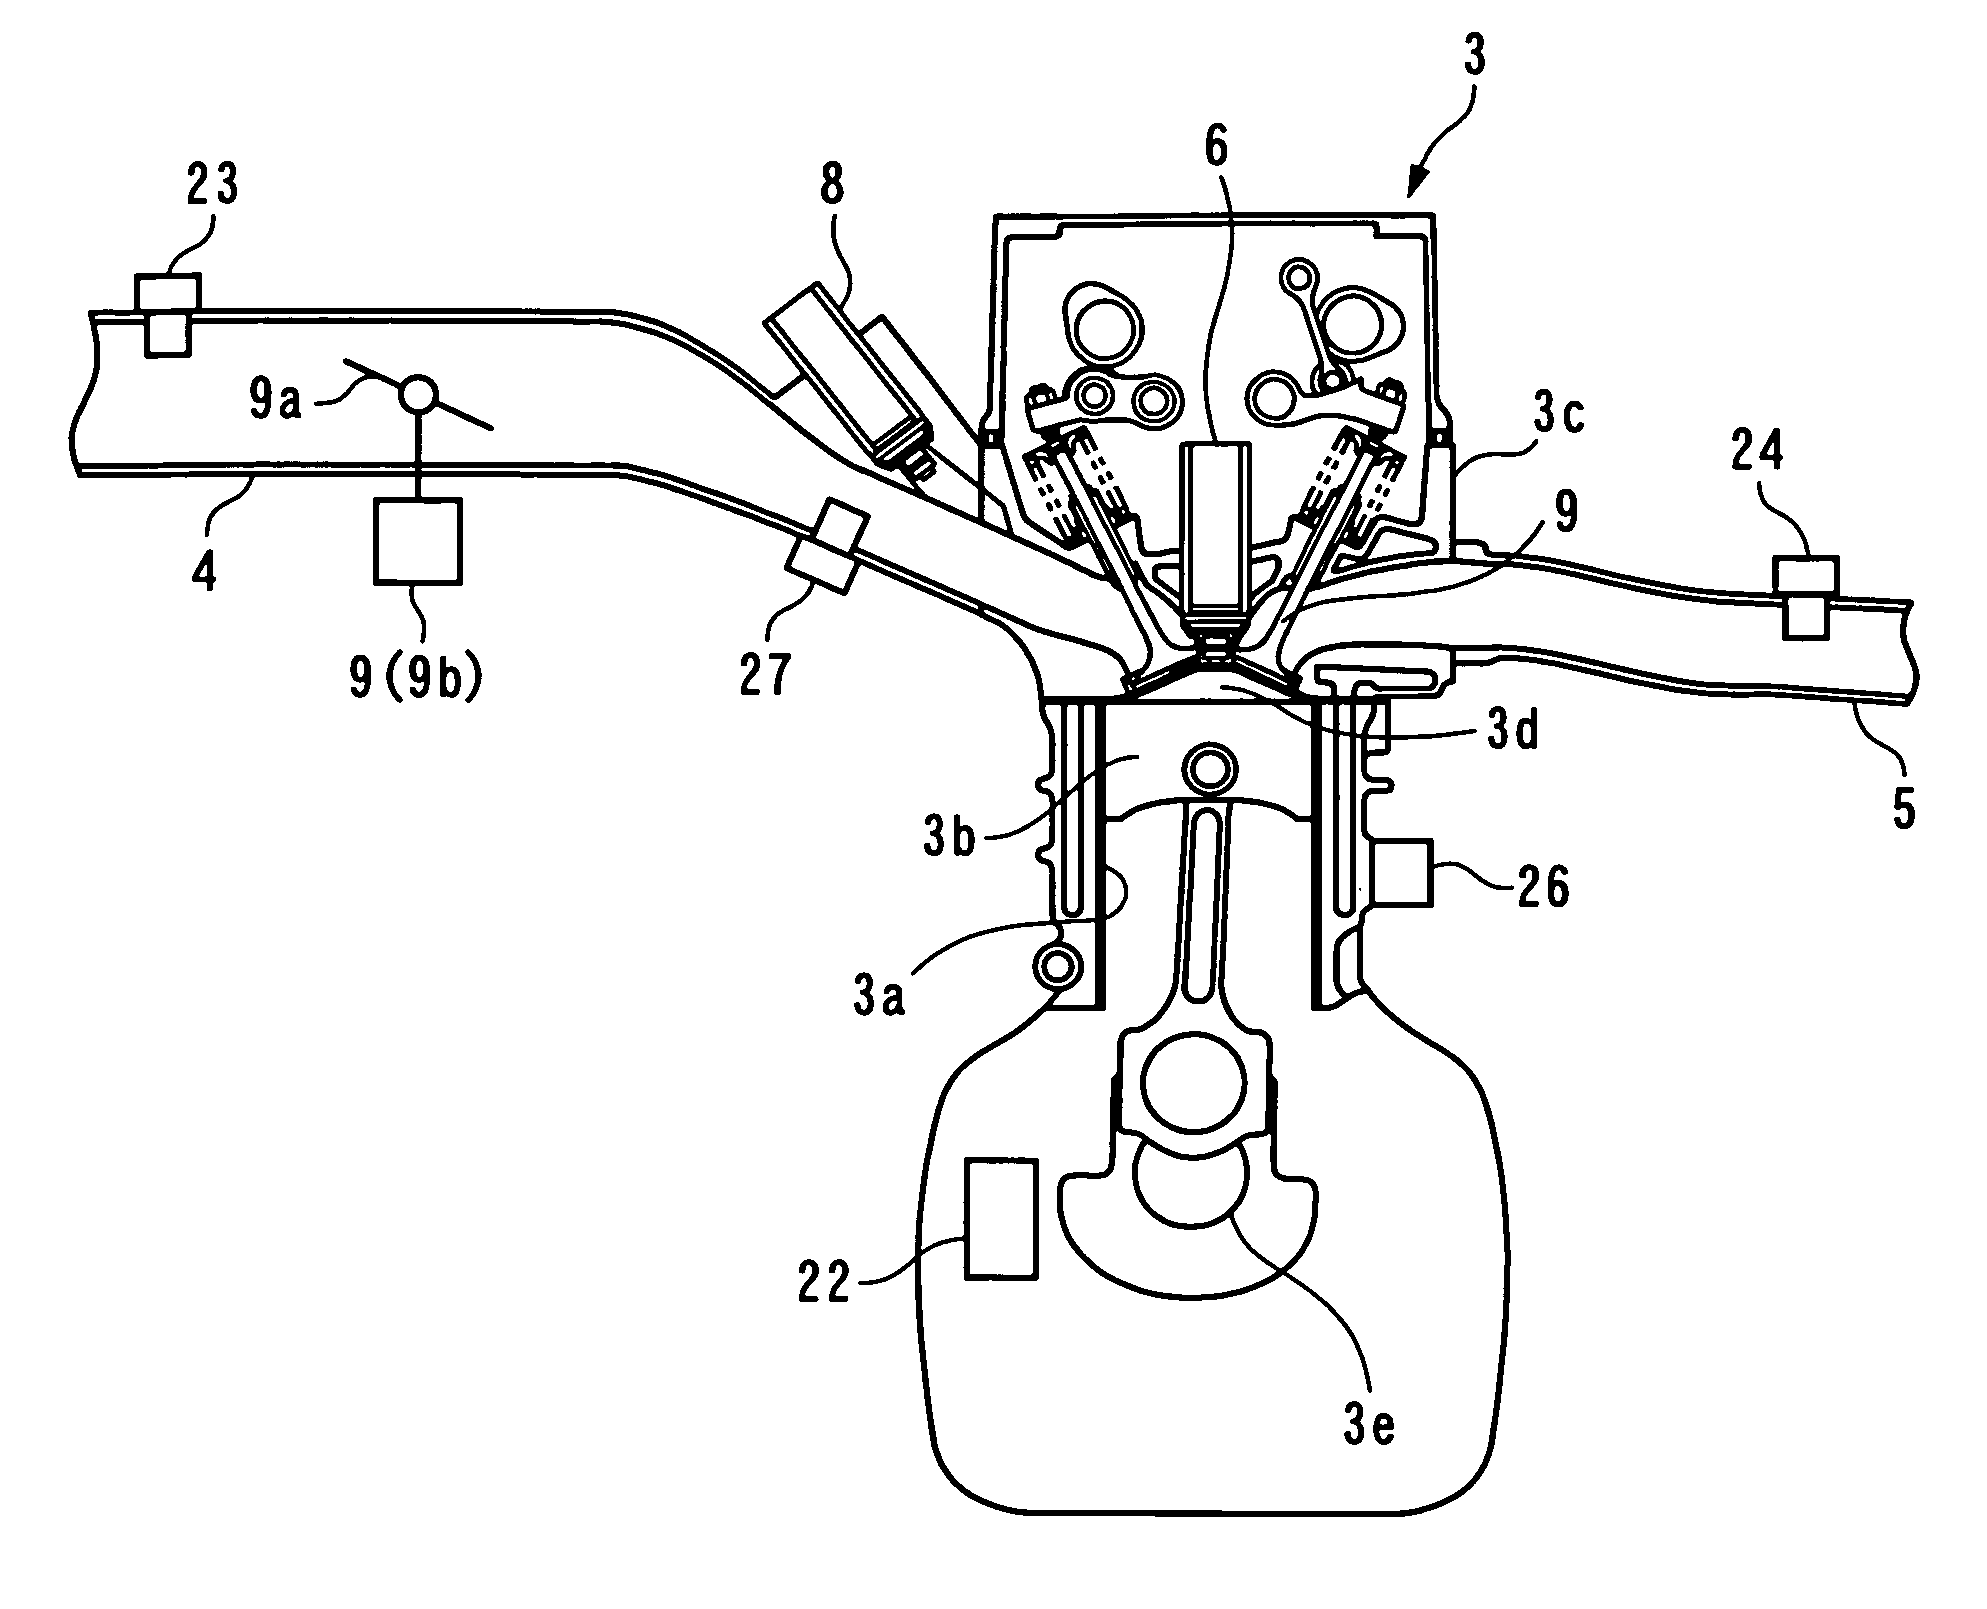 Fuel injection control apparatus and method for internal combustion engine